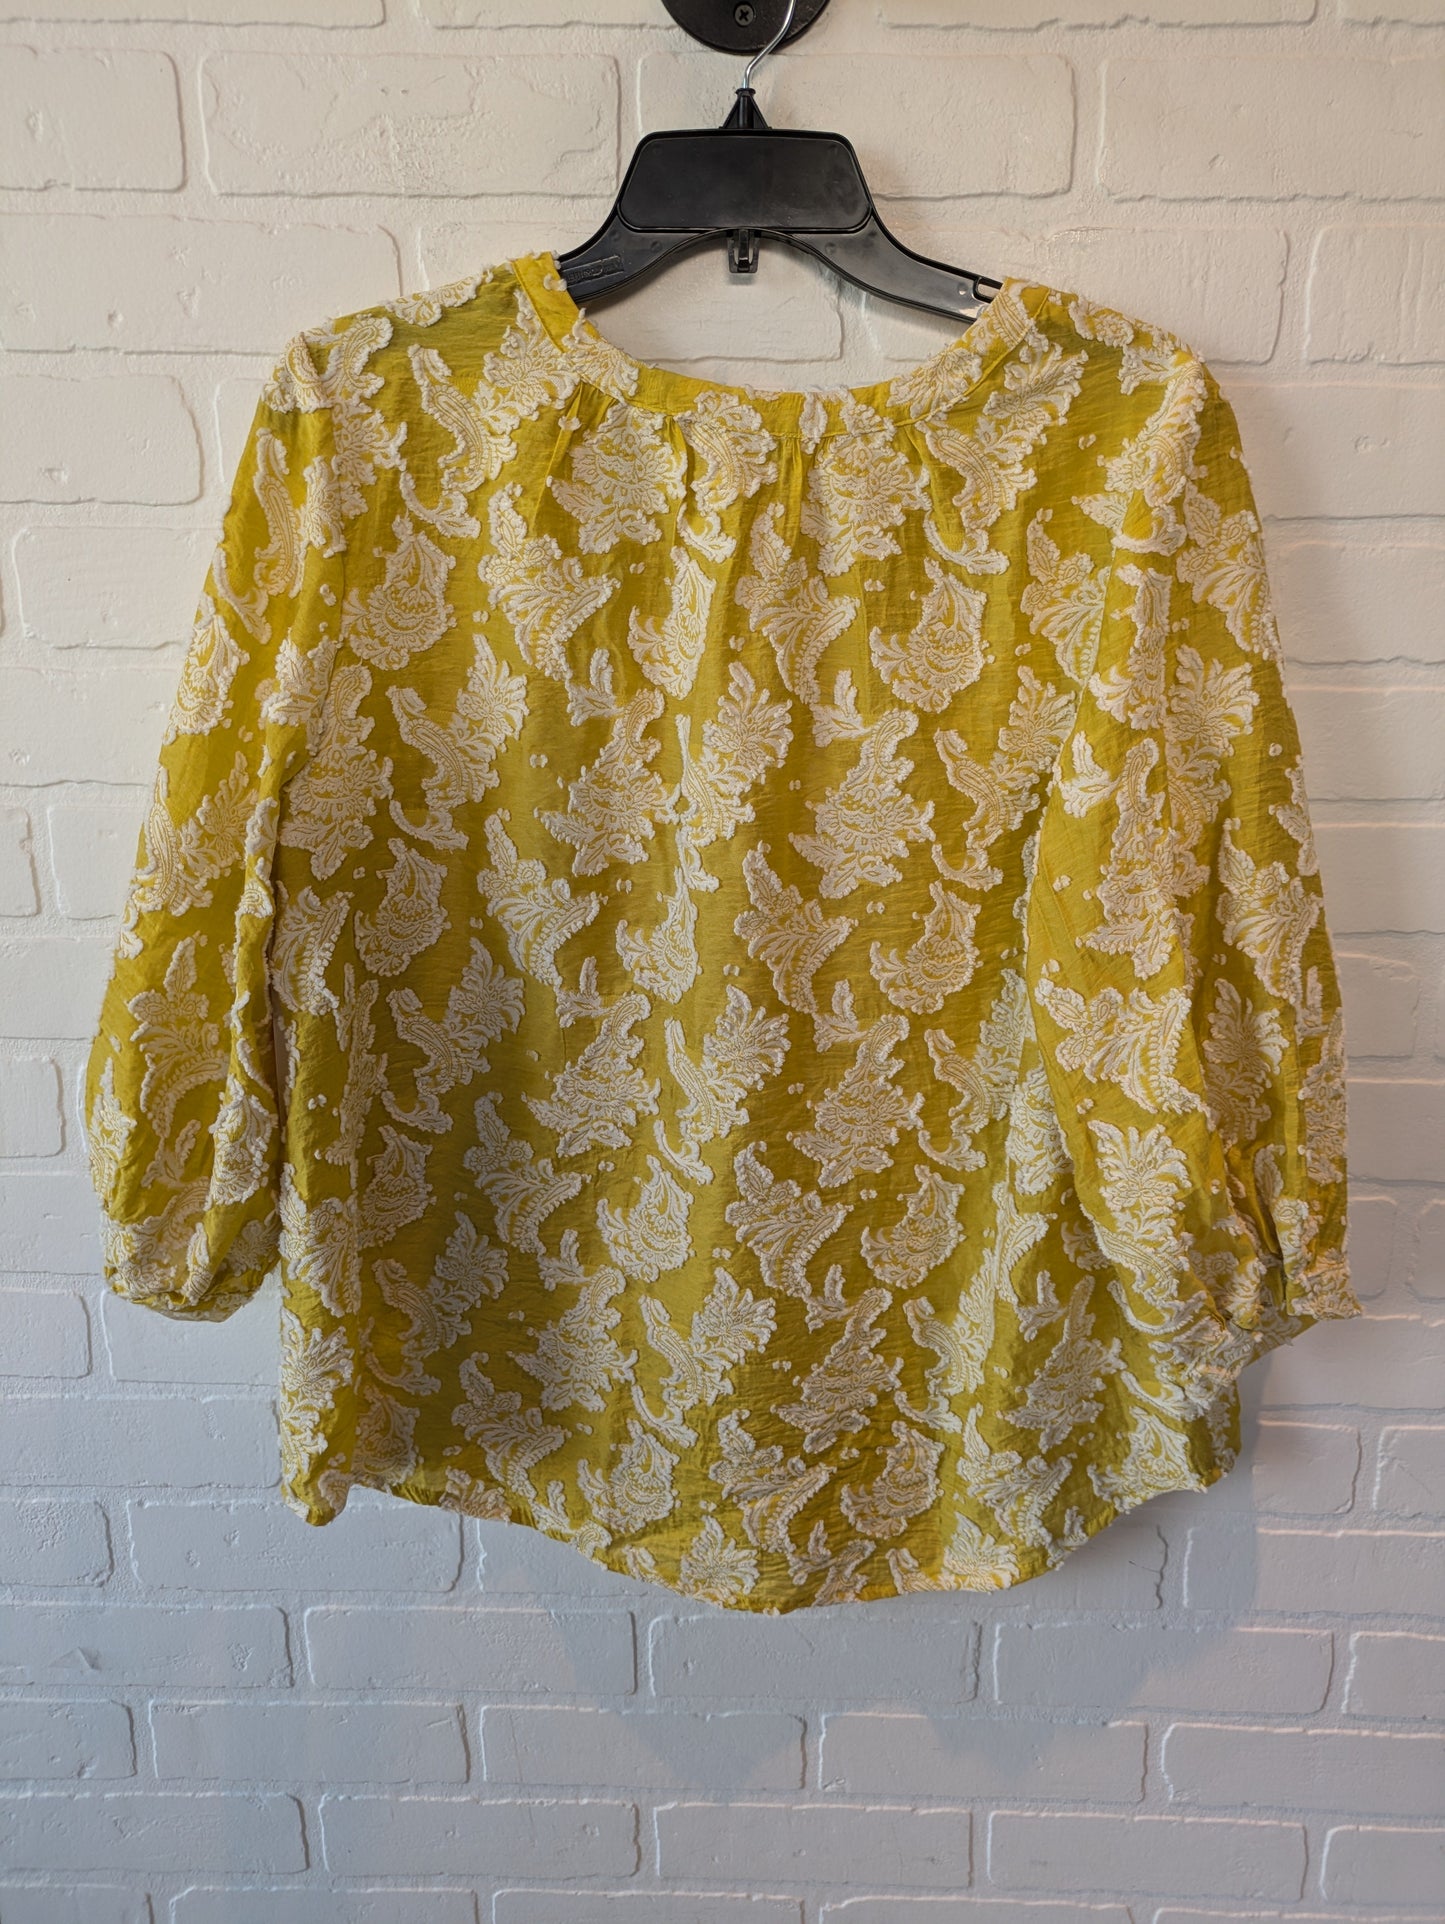 White & Yellow Top 3/4 Sleeve Chicos, Size L